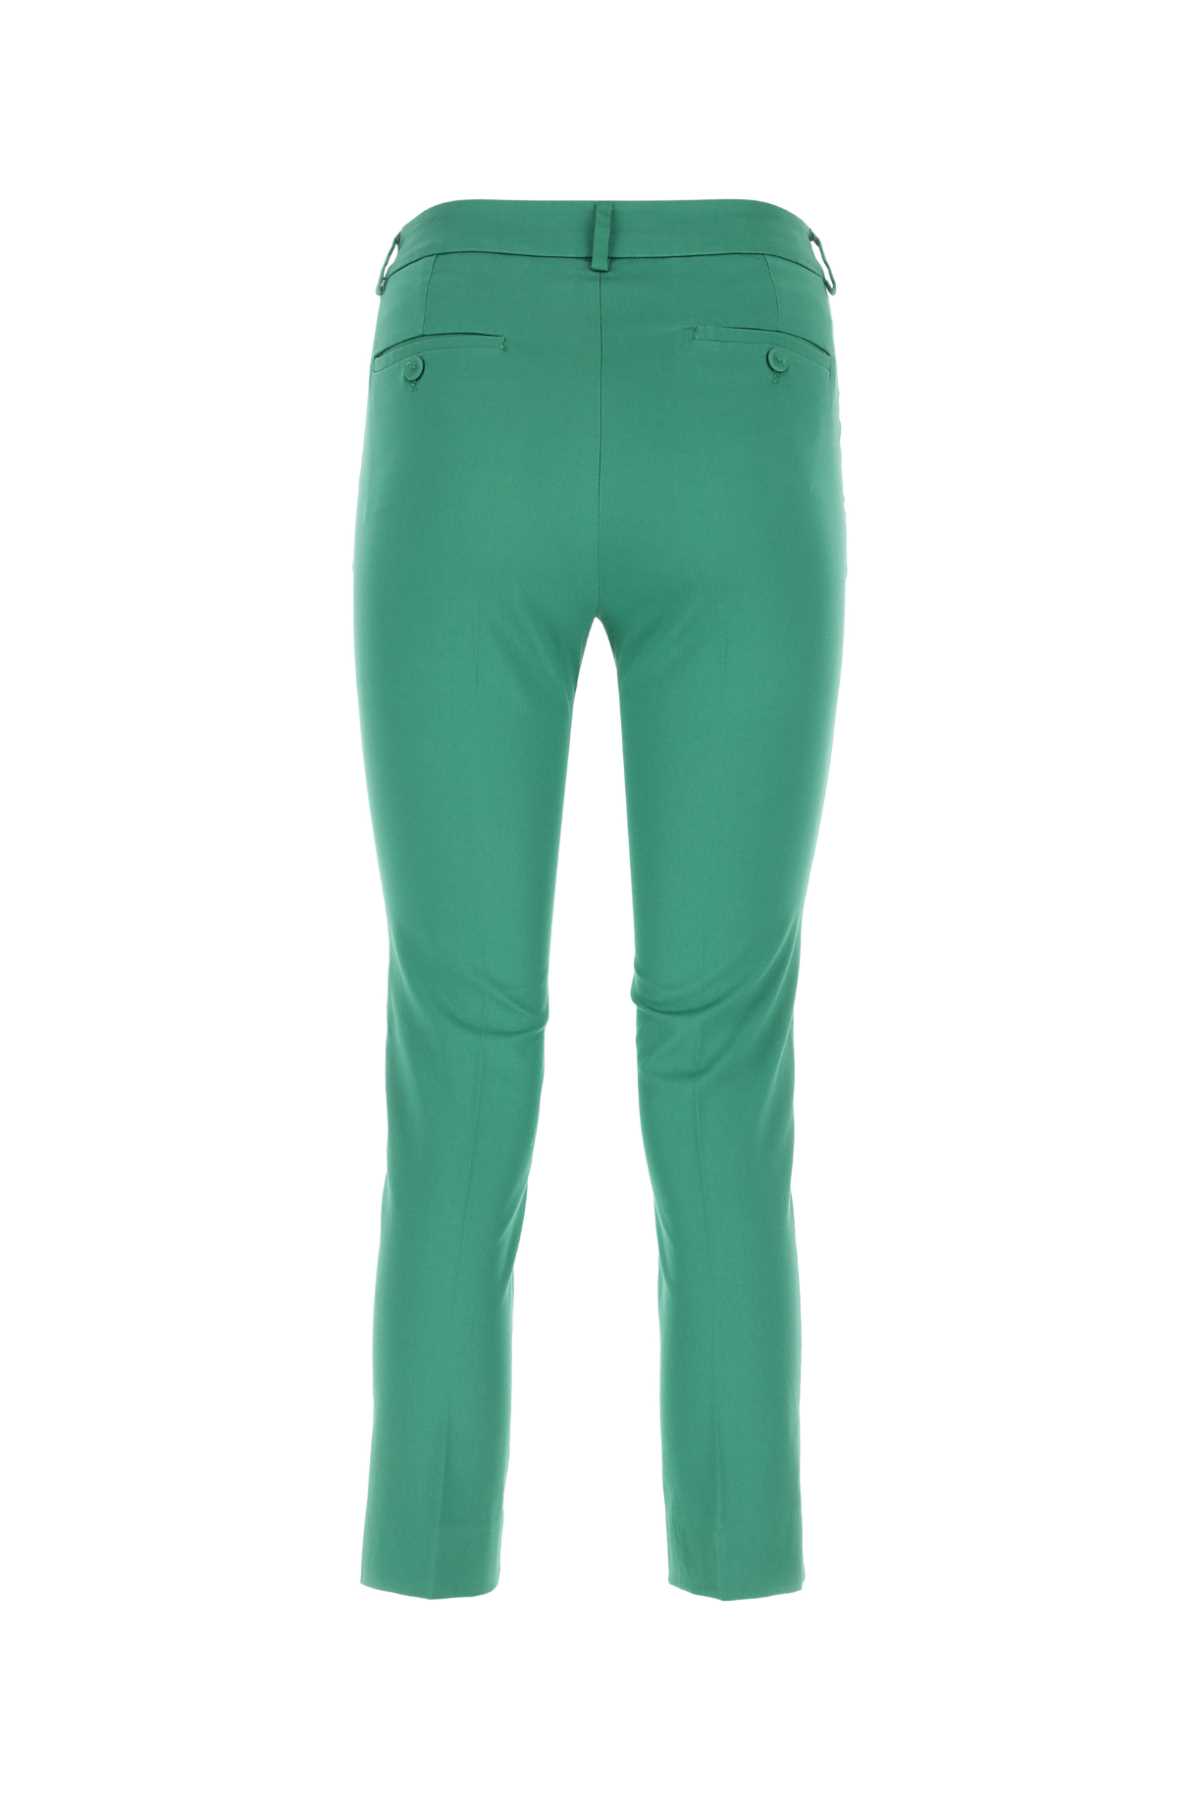 Weekend Max Mara Green Stretch Cotton Gineceo Pant In Verde